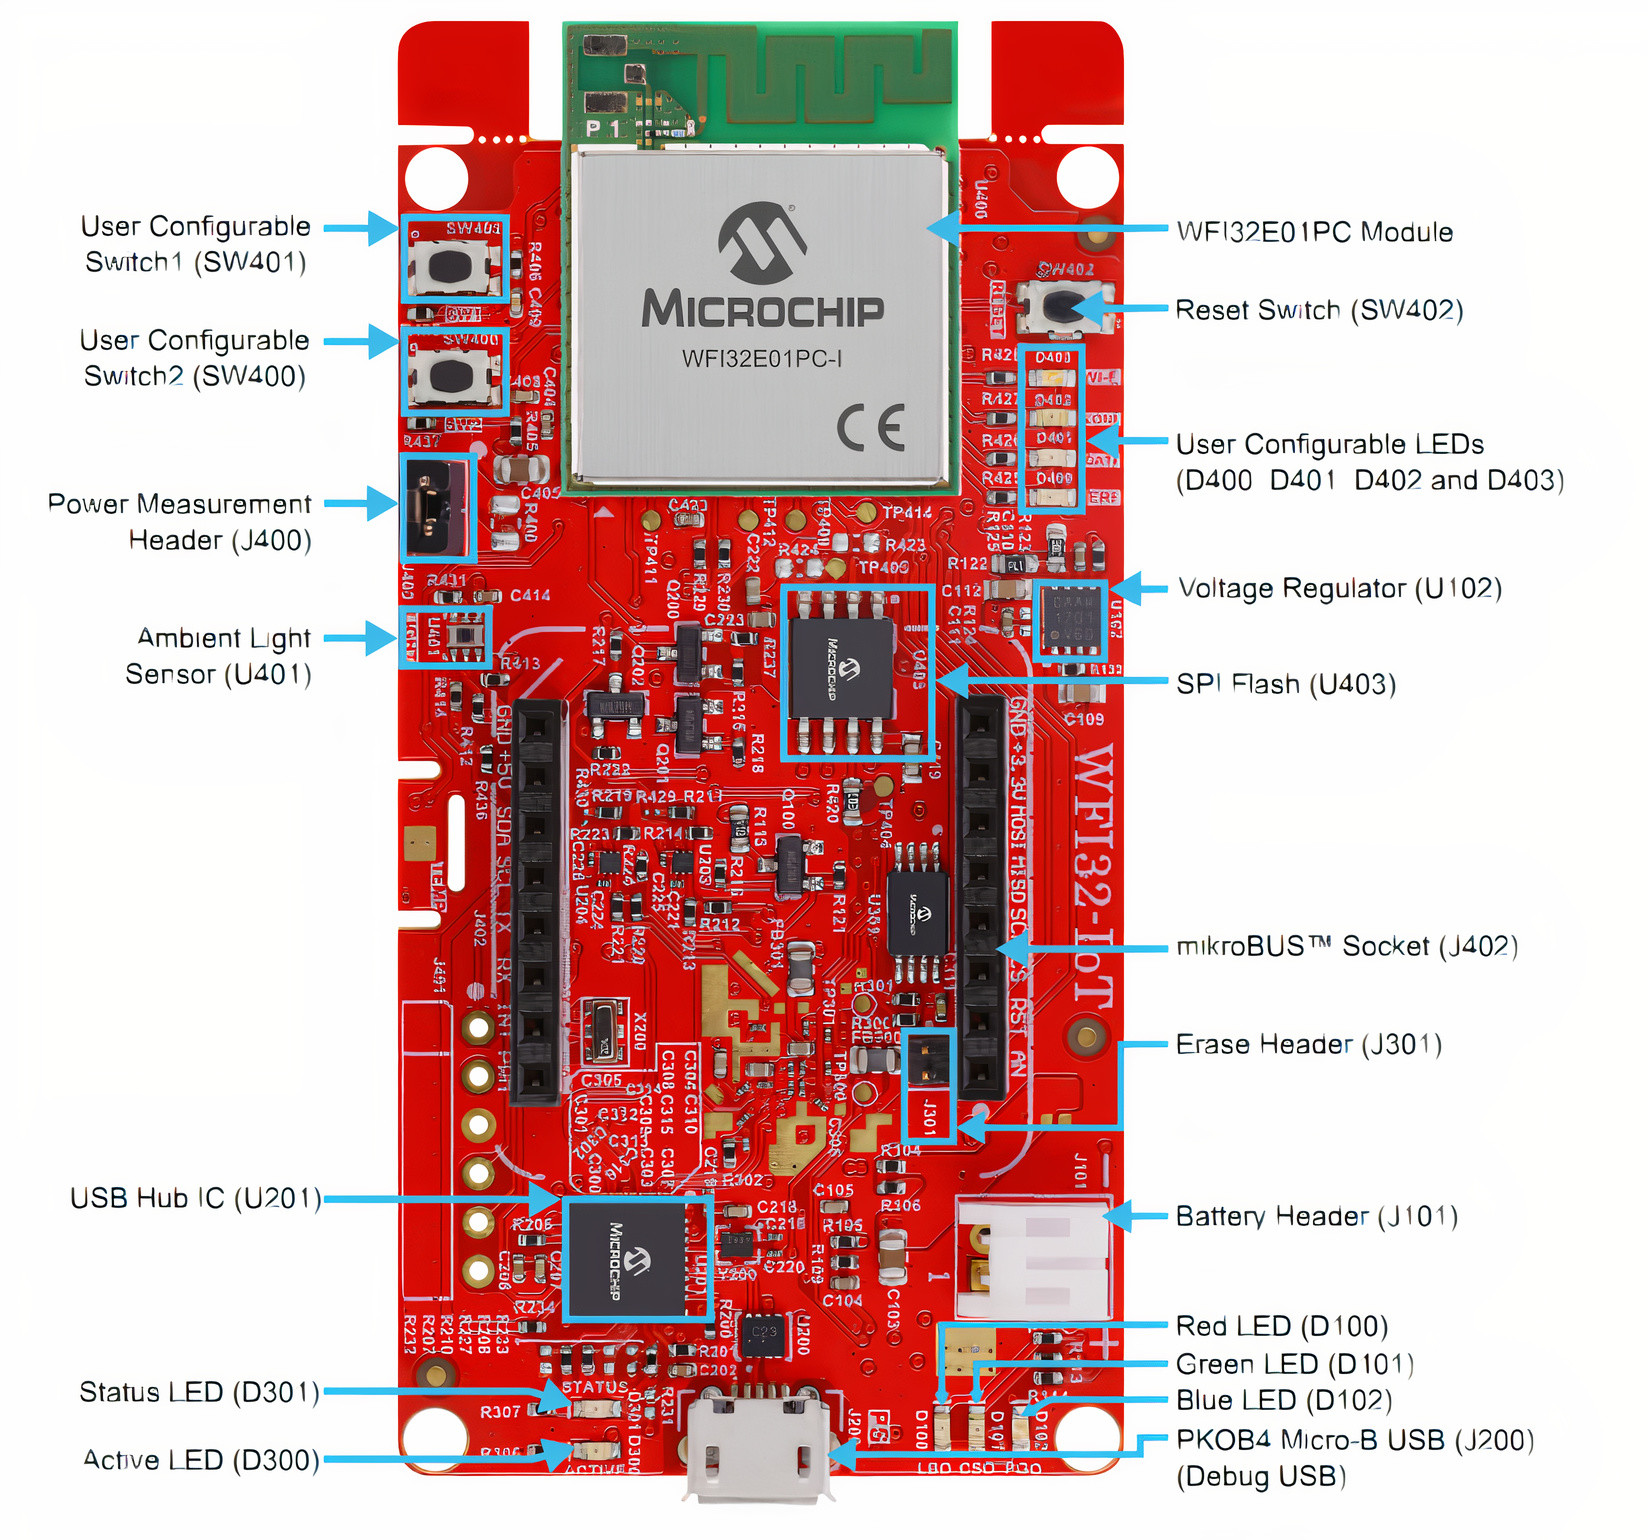 Selecting Microcontroller Dev Kits for IoT and IIoT Applications